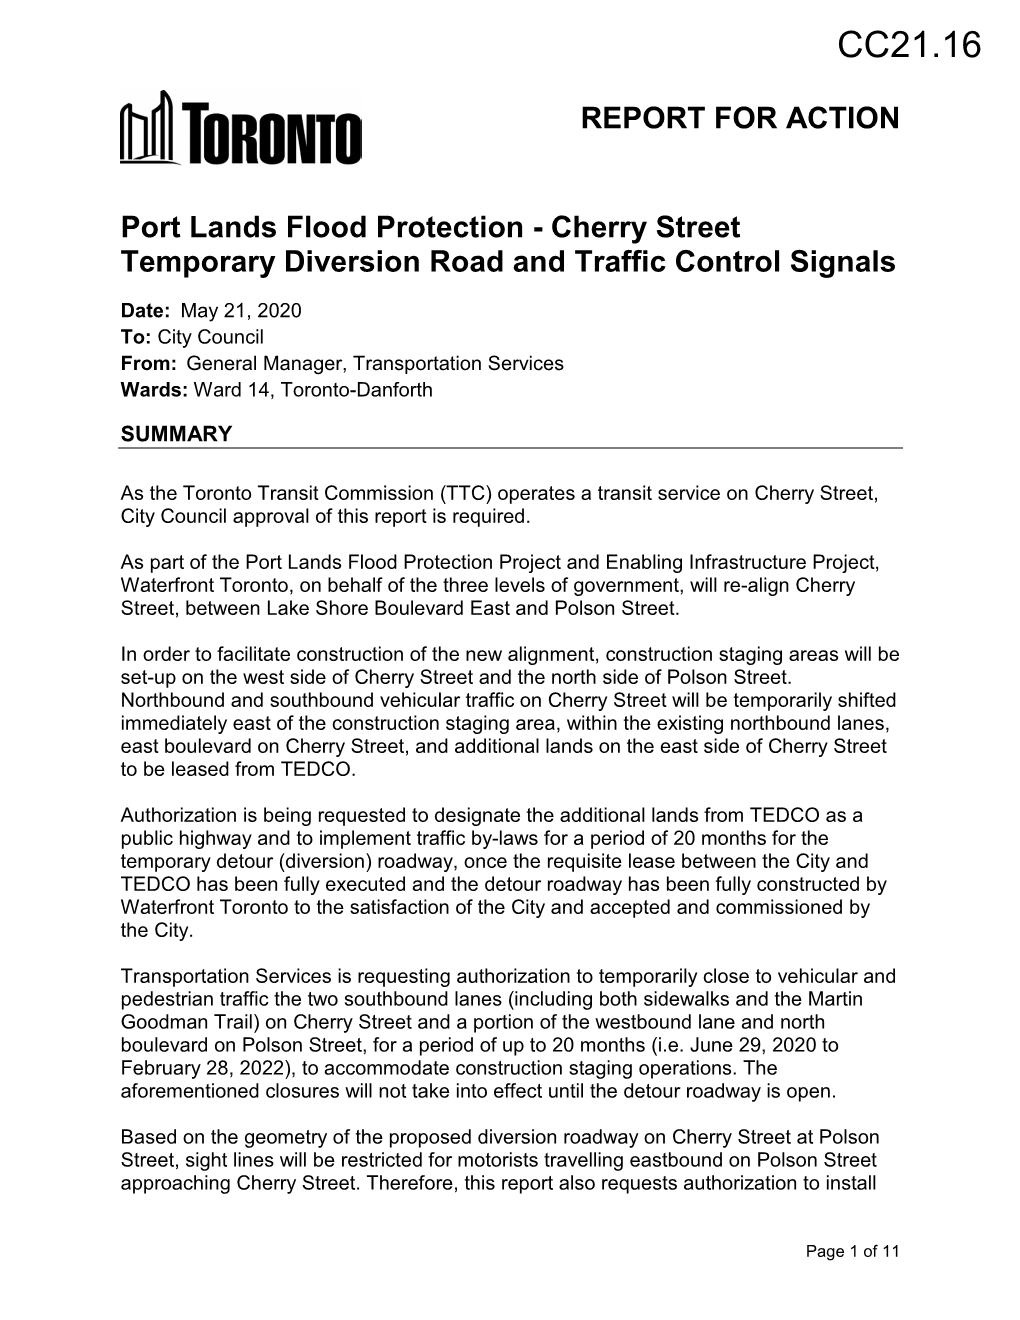 Port Lands Flood Protection - Cherry Street Temporary Diversion Road and Traffic Control Signals